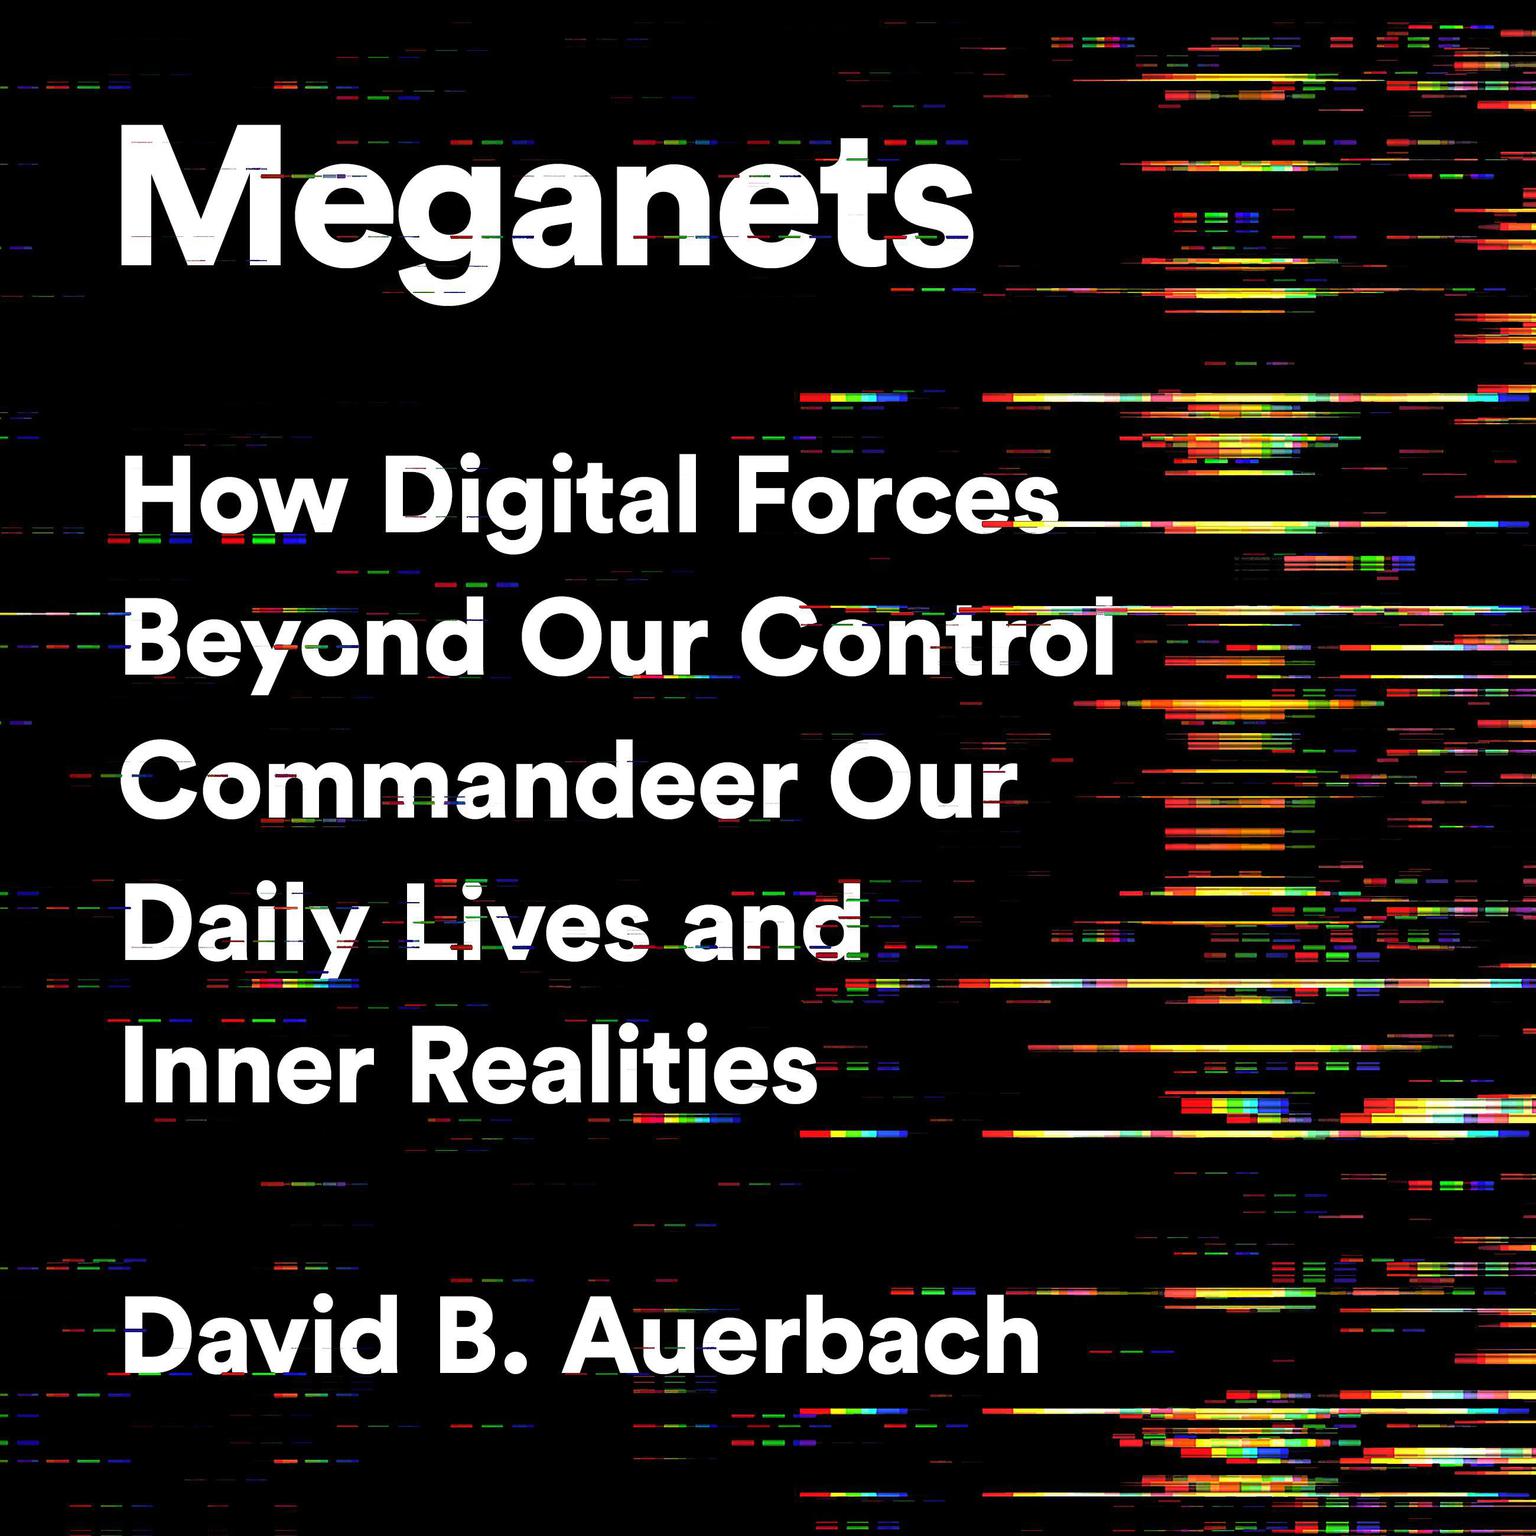 Meganets: How Digital Forces Beyond Our Control  Commandeer Our Daily Lives and Inner Realities Audiobook, by David B. Auerbach